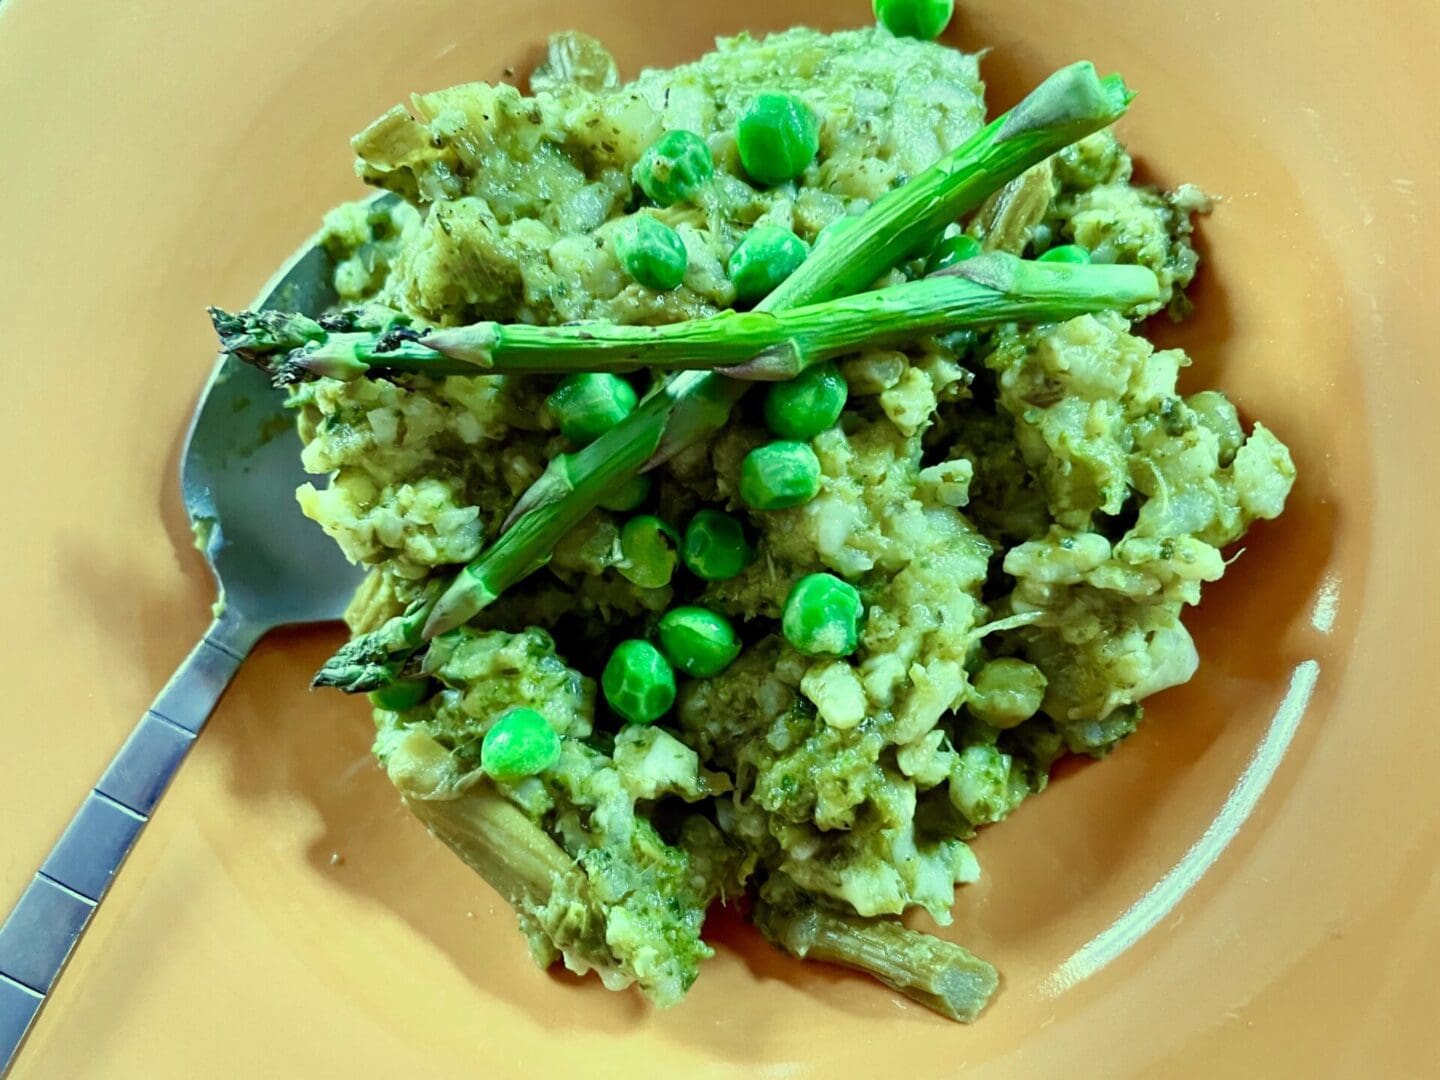 Risotto with asparagus and peas on an orange plate.